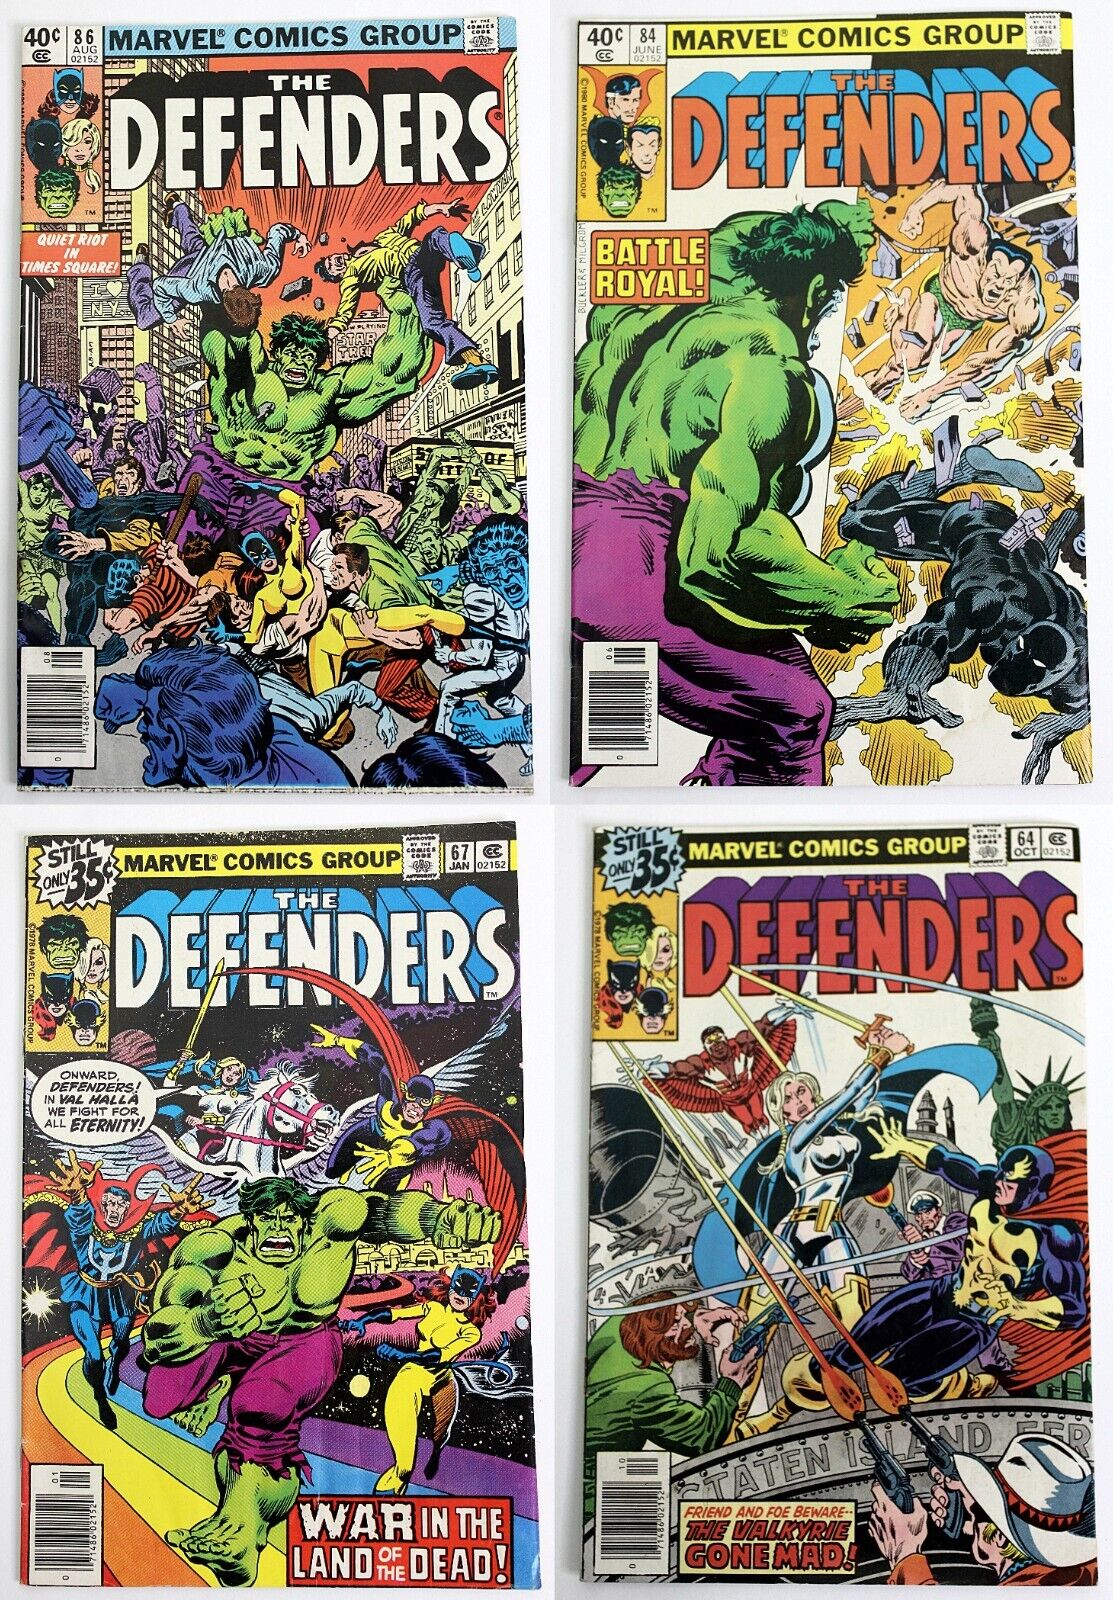 THE DEFENDERS 4 Marvel Comics #s 64, 67, 84 & 86 See Pics for condition